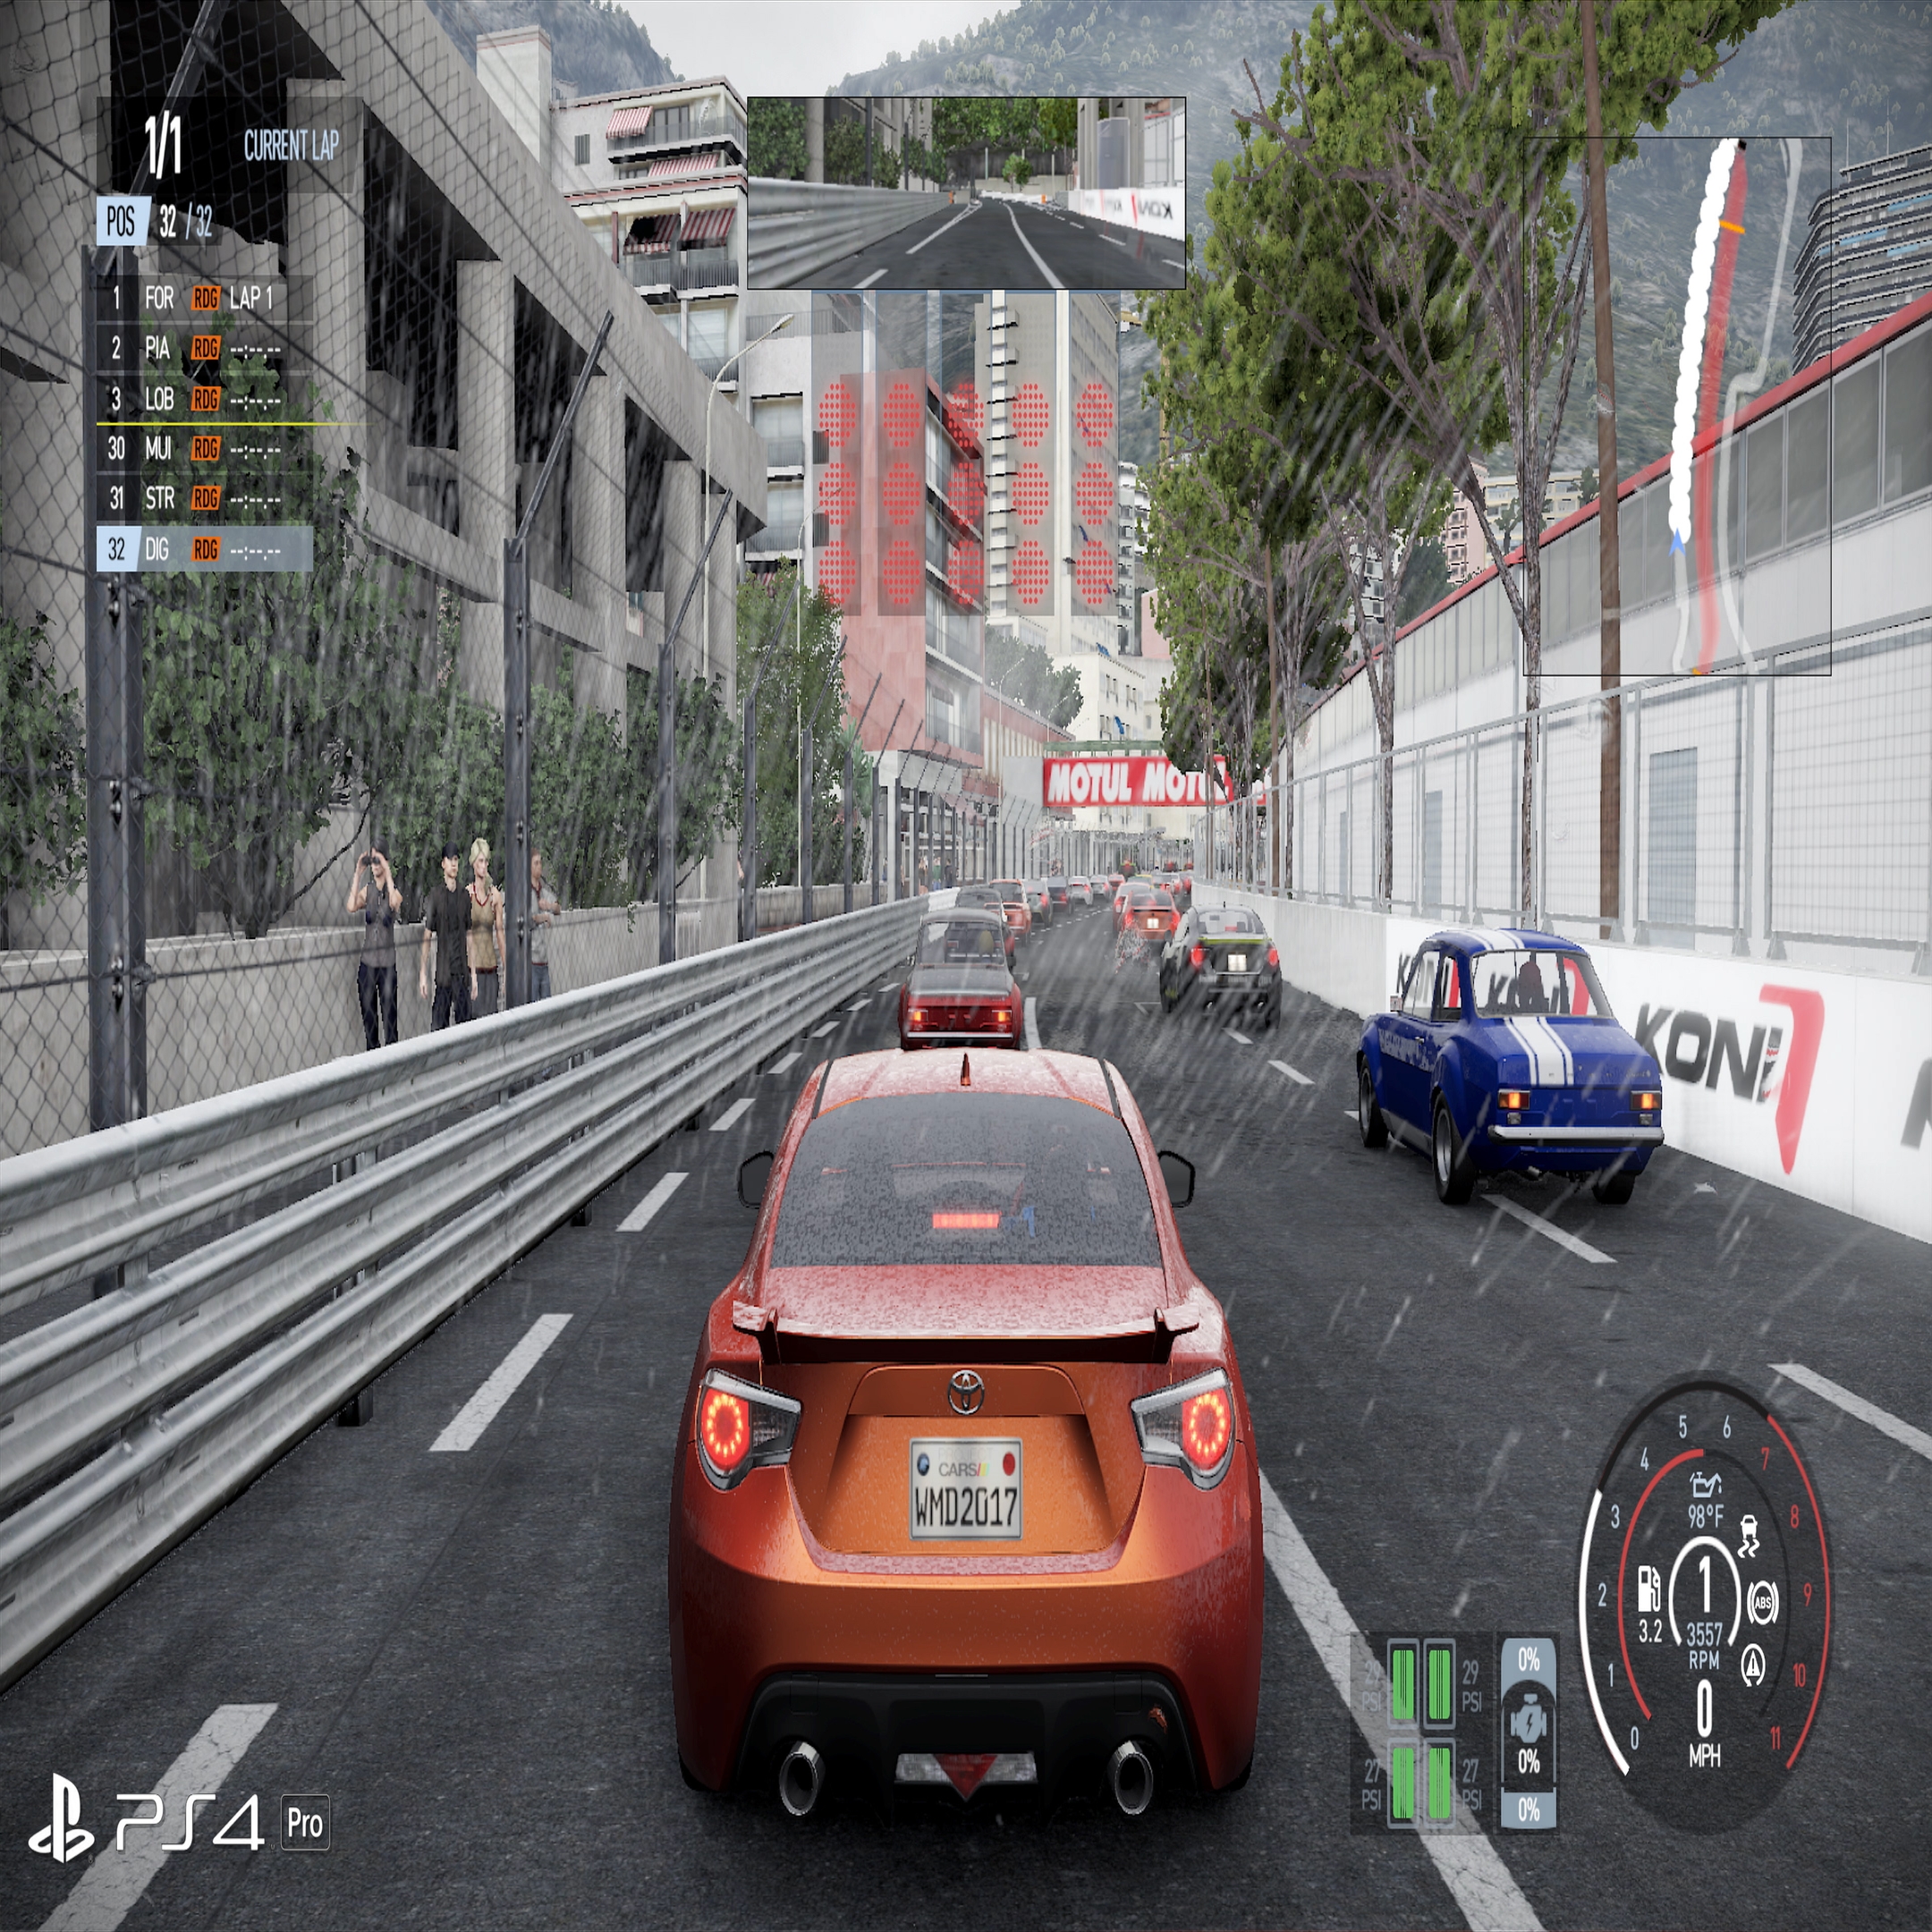 Project CARS 3 PS4 Pro Review - Is it a good authentic racer or a